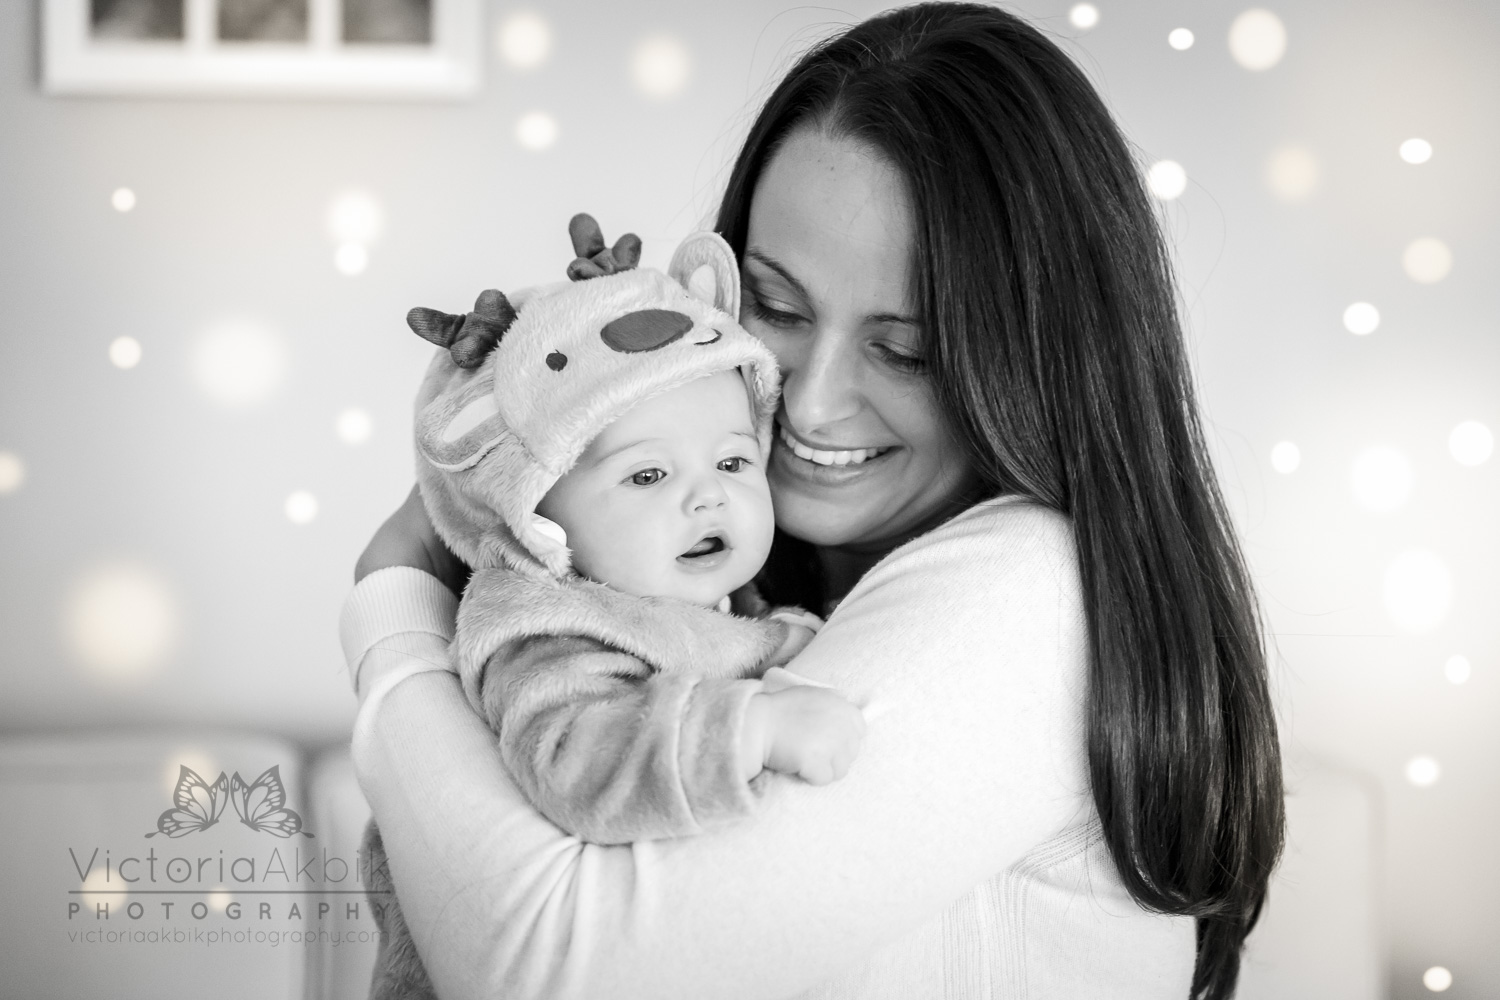 The Best Christmas Gift EVER? | Abu Dhabi Lifestyle Family Photography » Victoria Akbik Photography